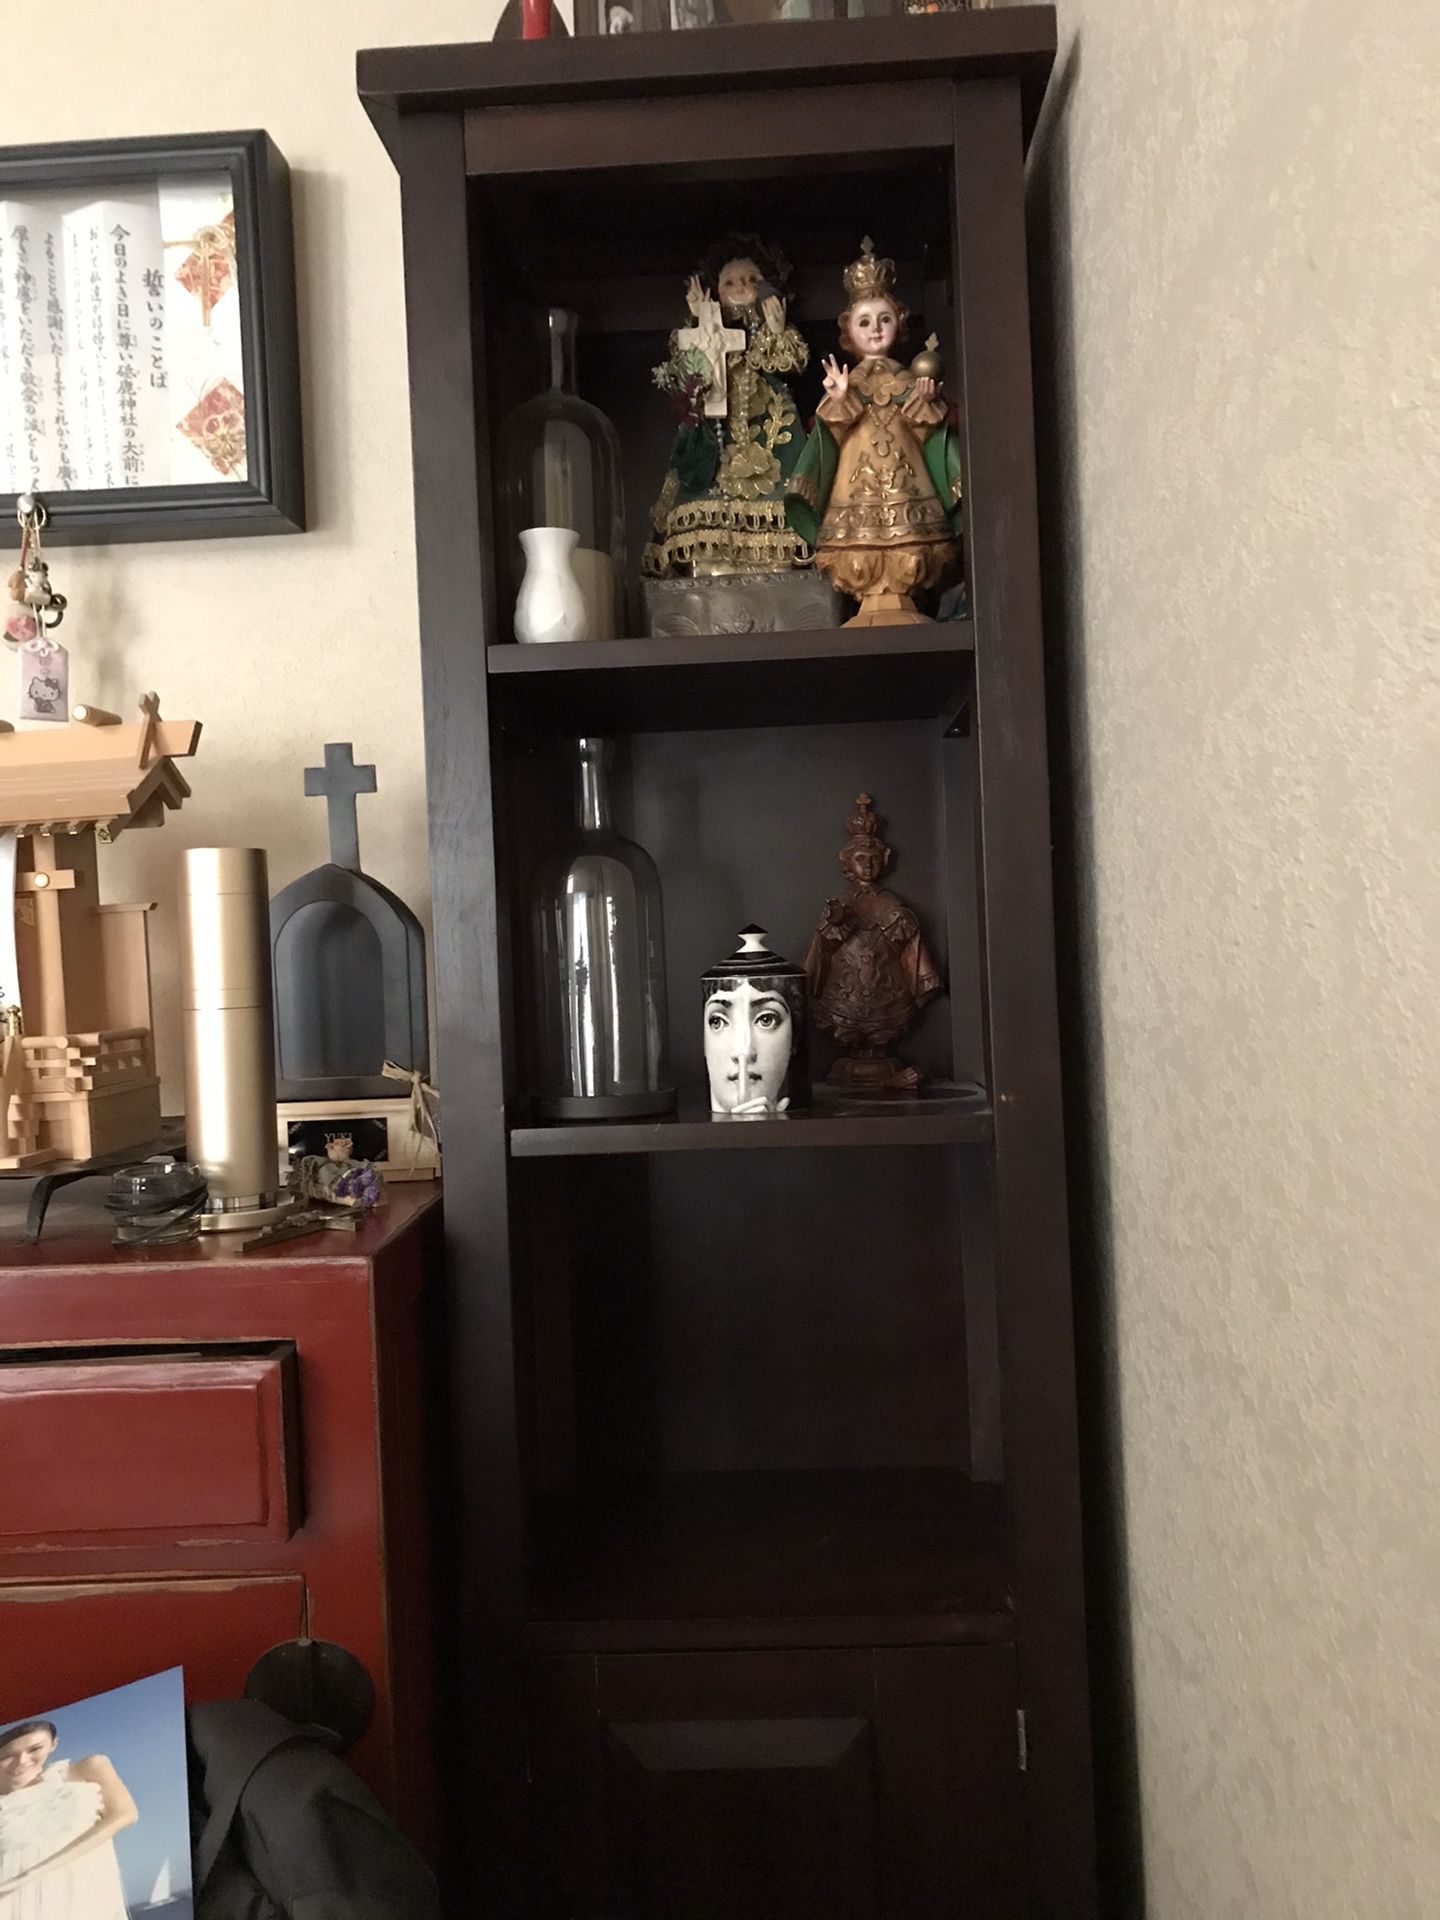 World Market- solid wood curio or bookshelf $20 must pick up today October 28